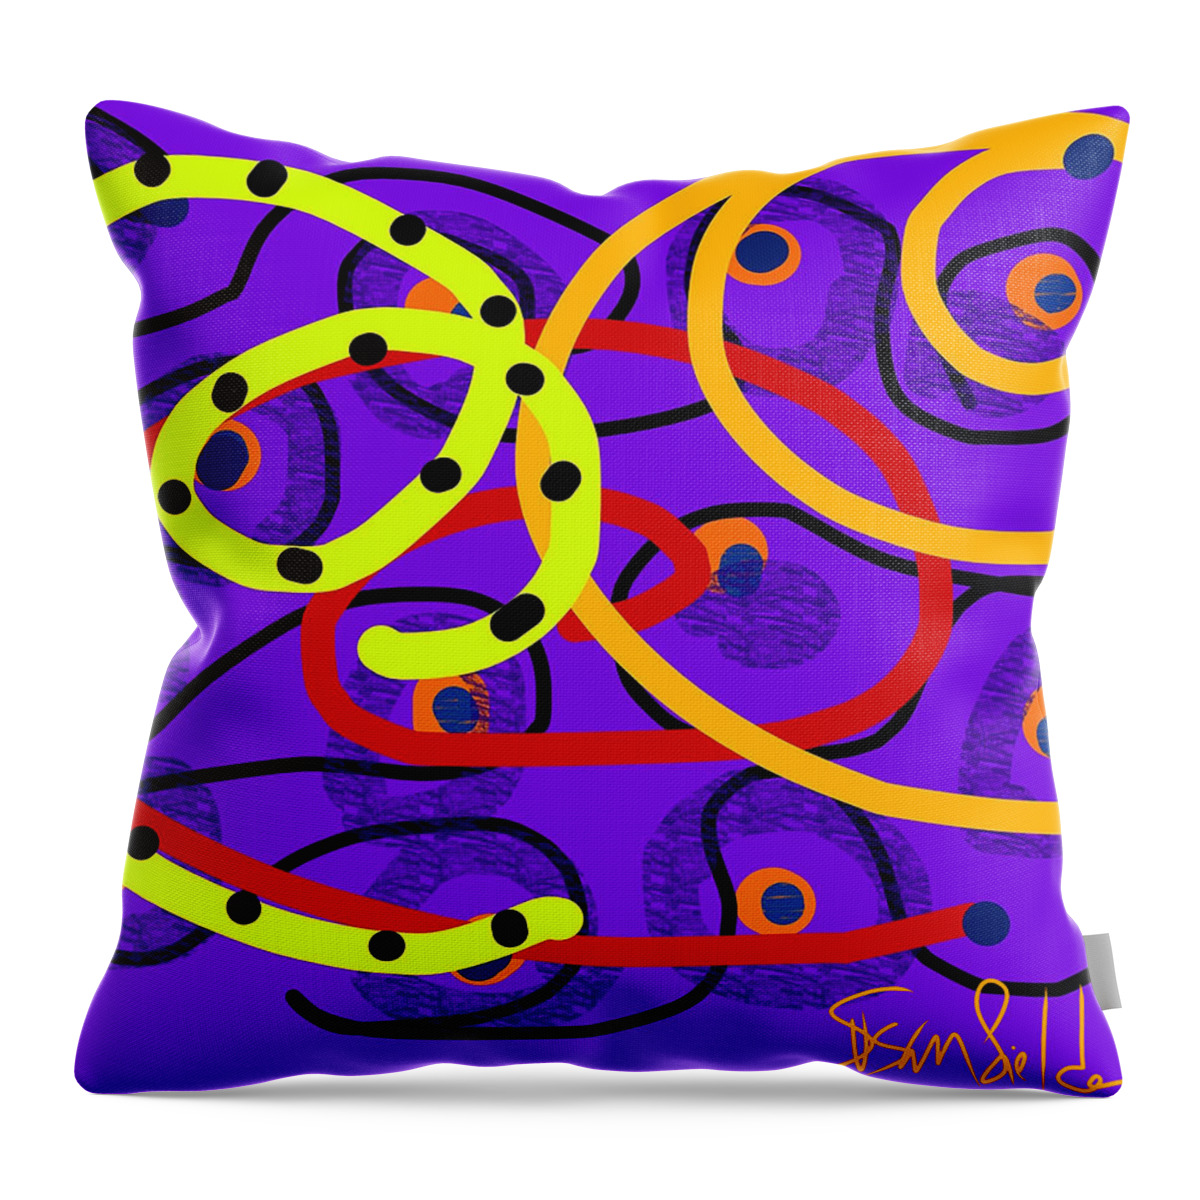 Dan Mears Throw Pillow featuring the digital art Peaceful Passion In memory of Dan Mears by Susan Fielder